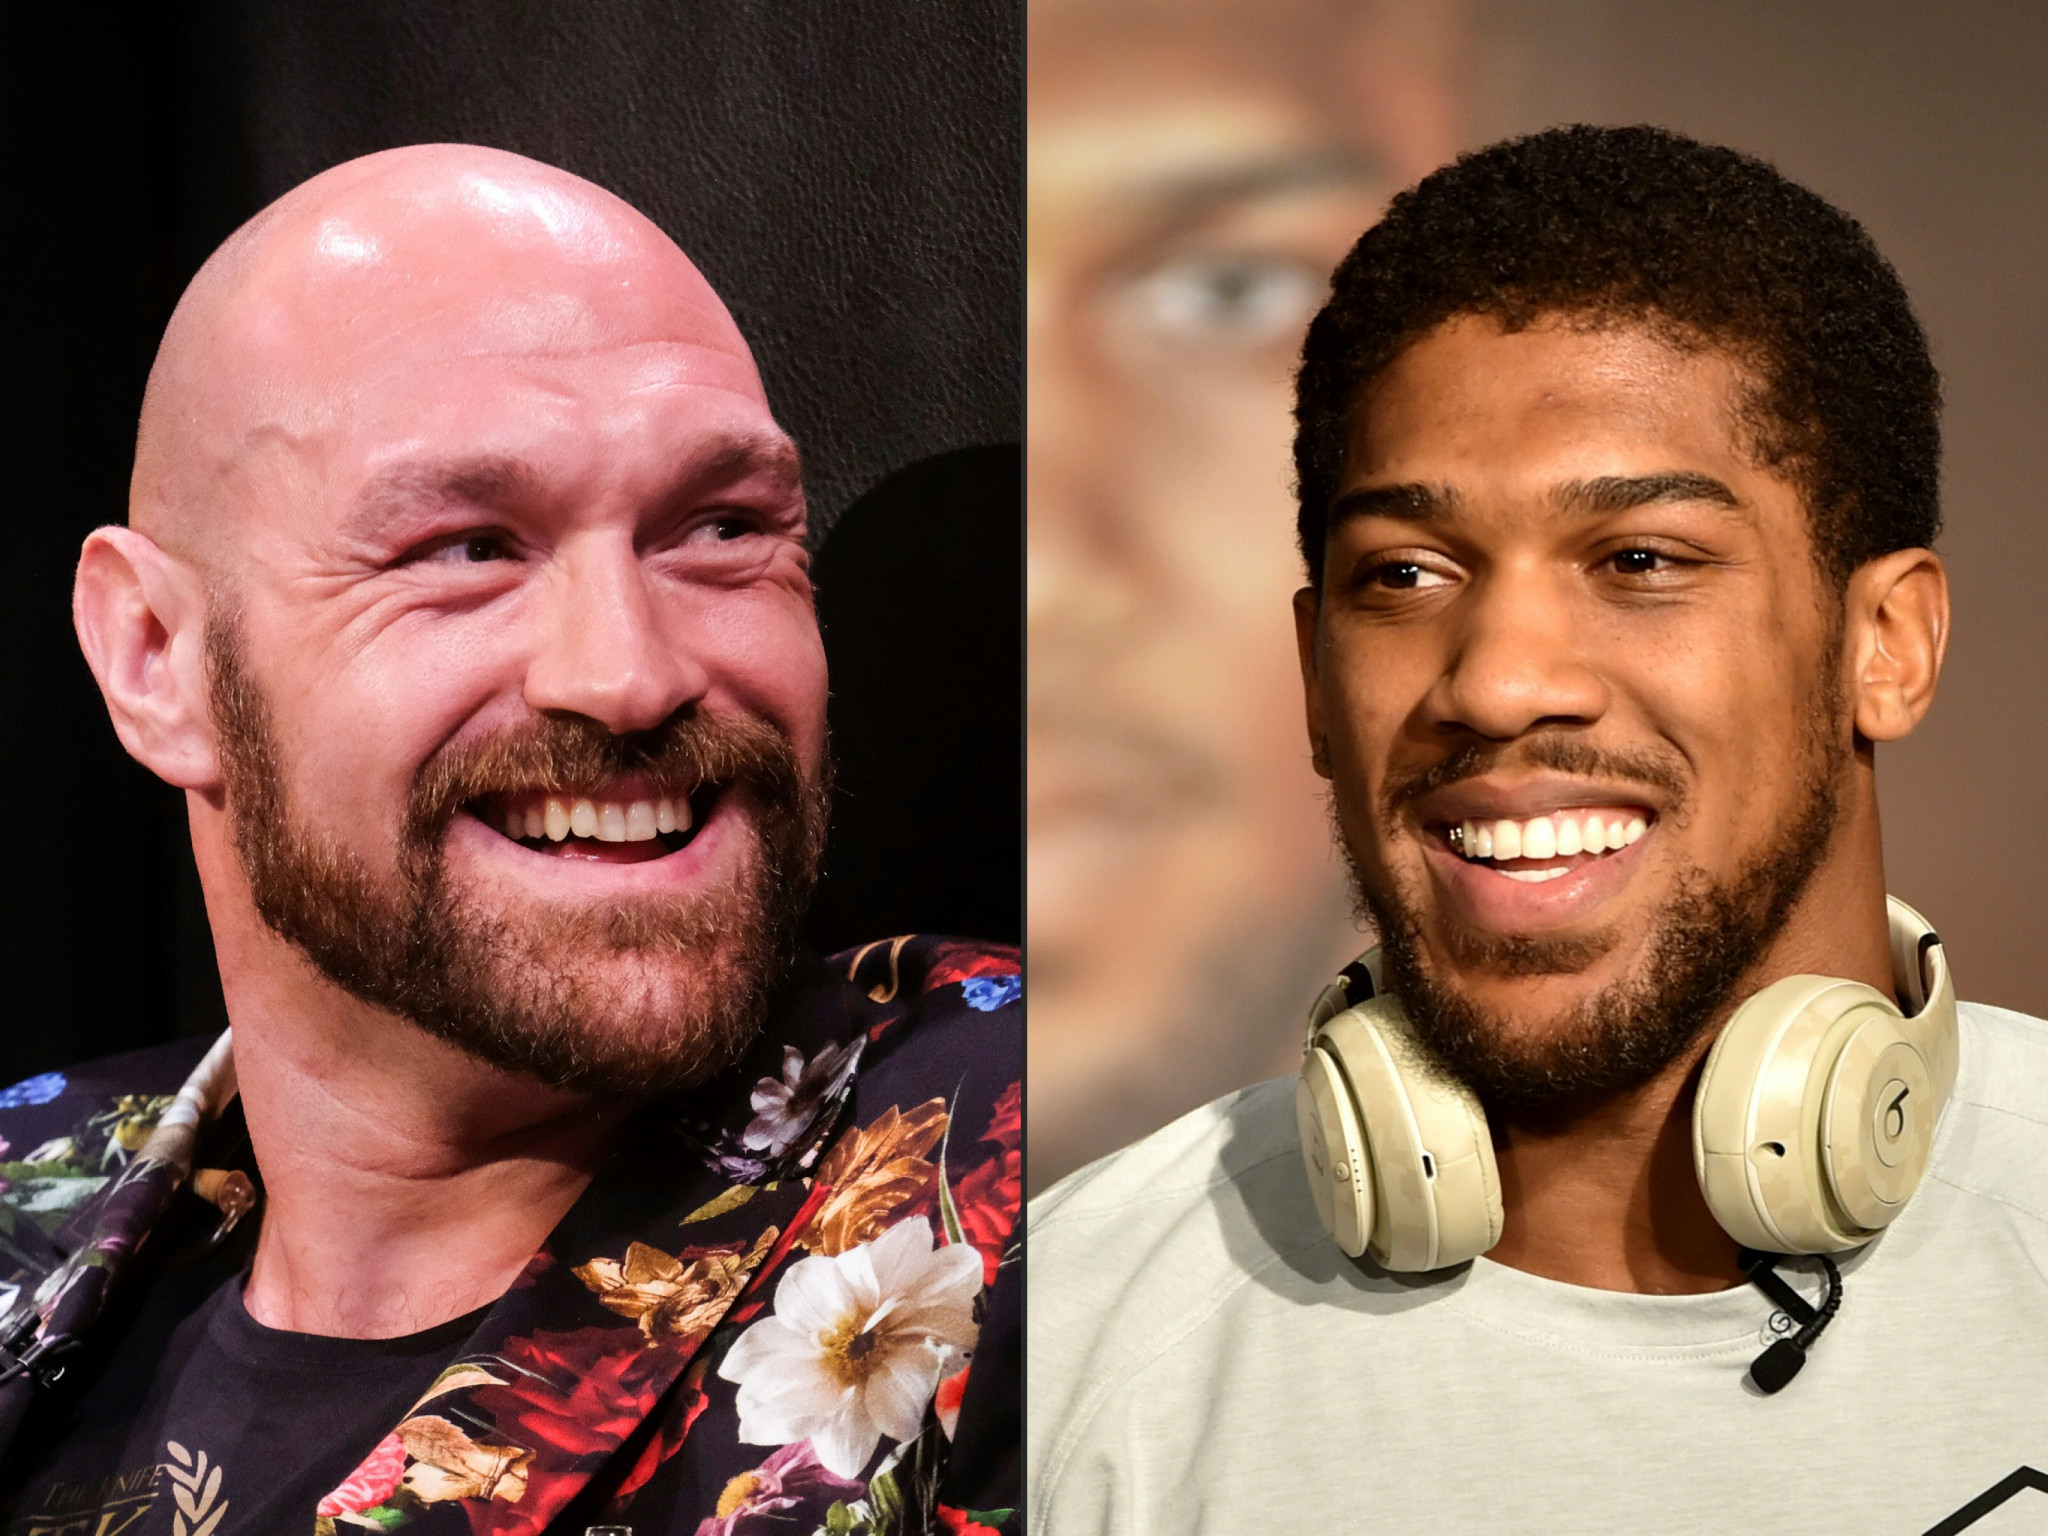 Tyson Fury v Anthony Joshua is being billed as the fight of this century - if it takes place ©Getty Images